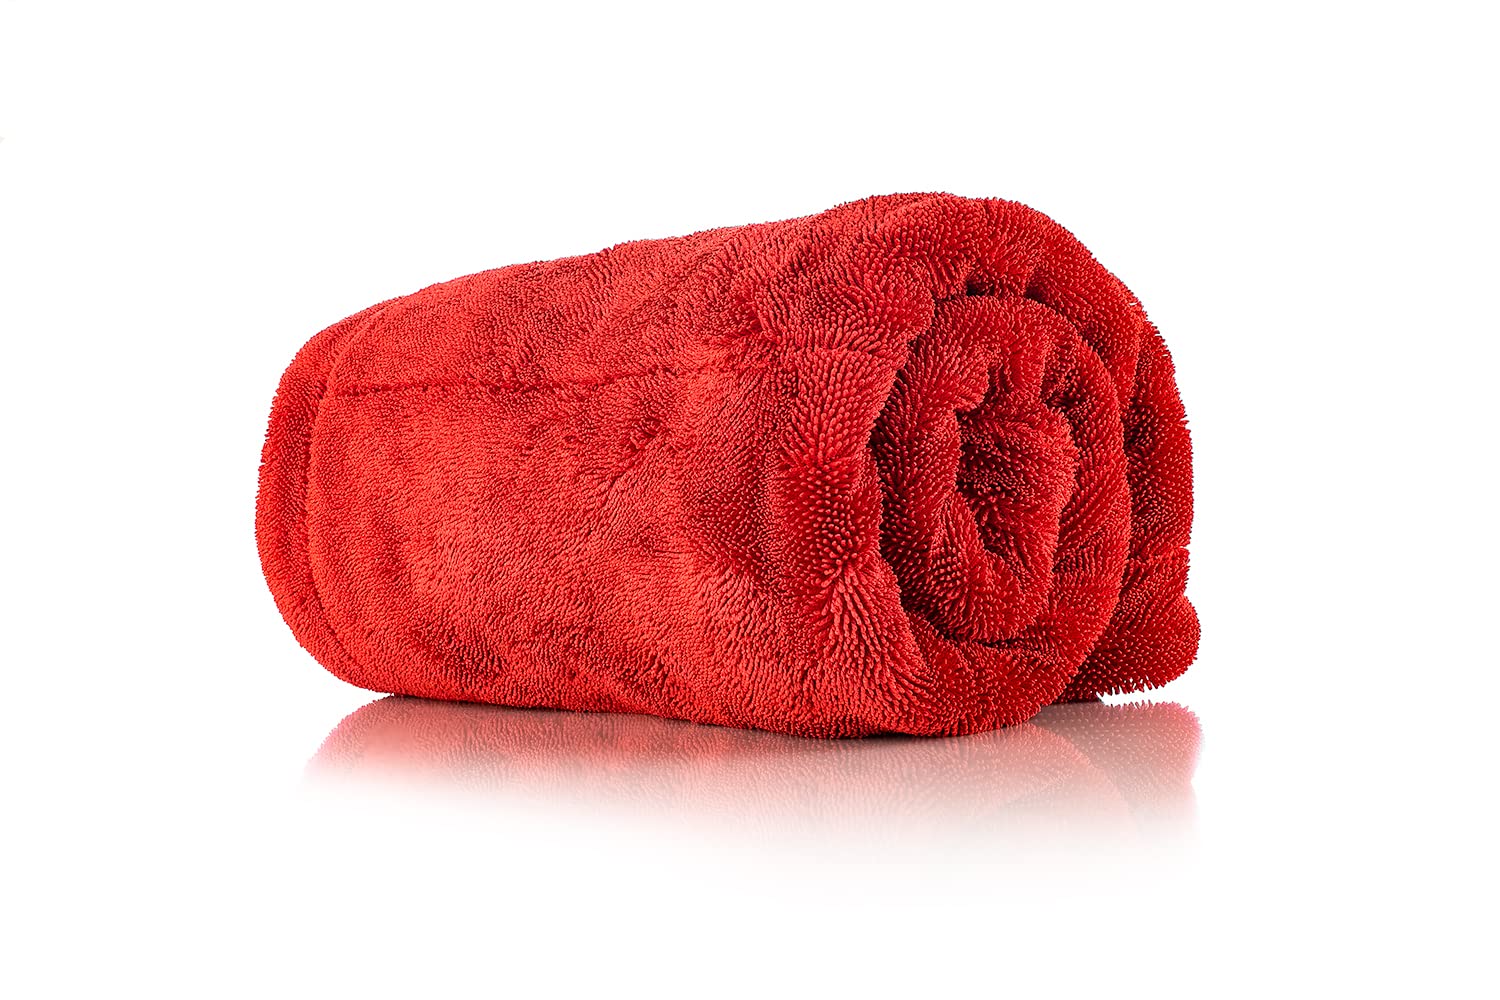 The Rag Company - The 1500 - Heavy Duty Microfiber Drying Towel; Perfect for Trucks, Commercial Vehicles, RVs, Boats, and More; Premium 70/30 Blend Twist Loop Design, 1500gsm, 30in x 30in, Red